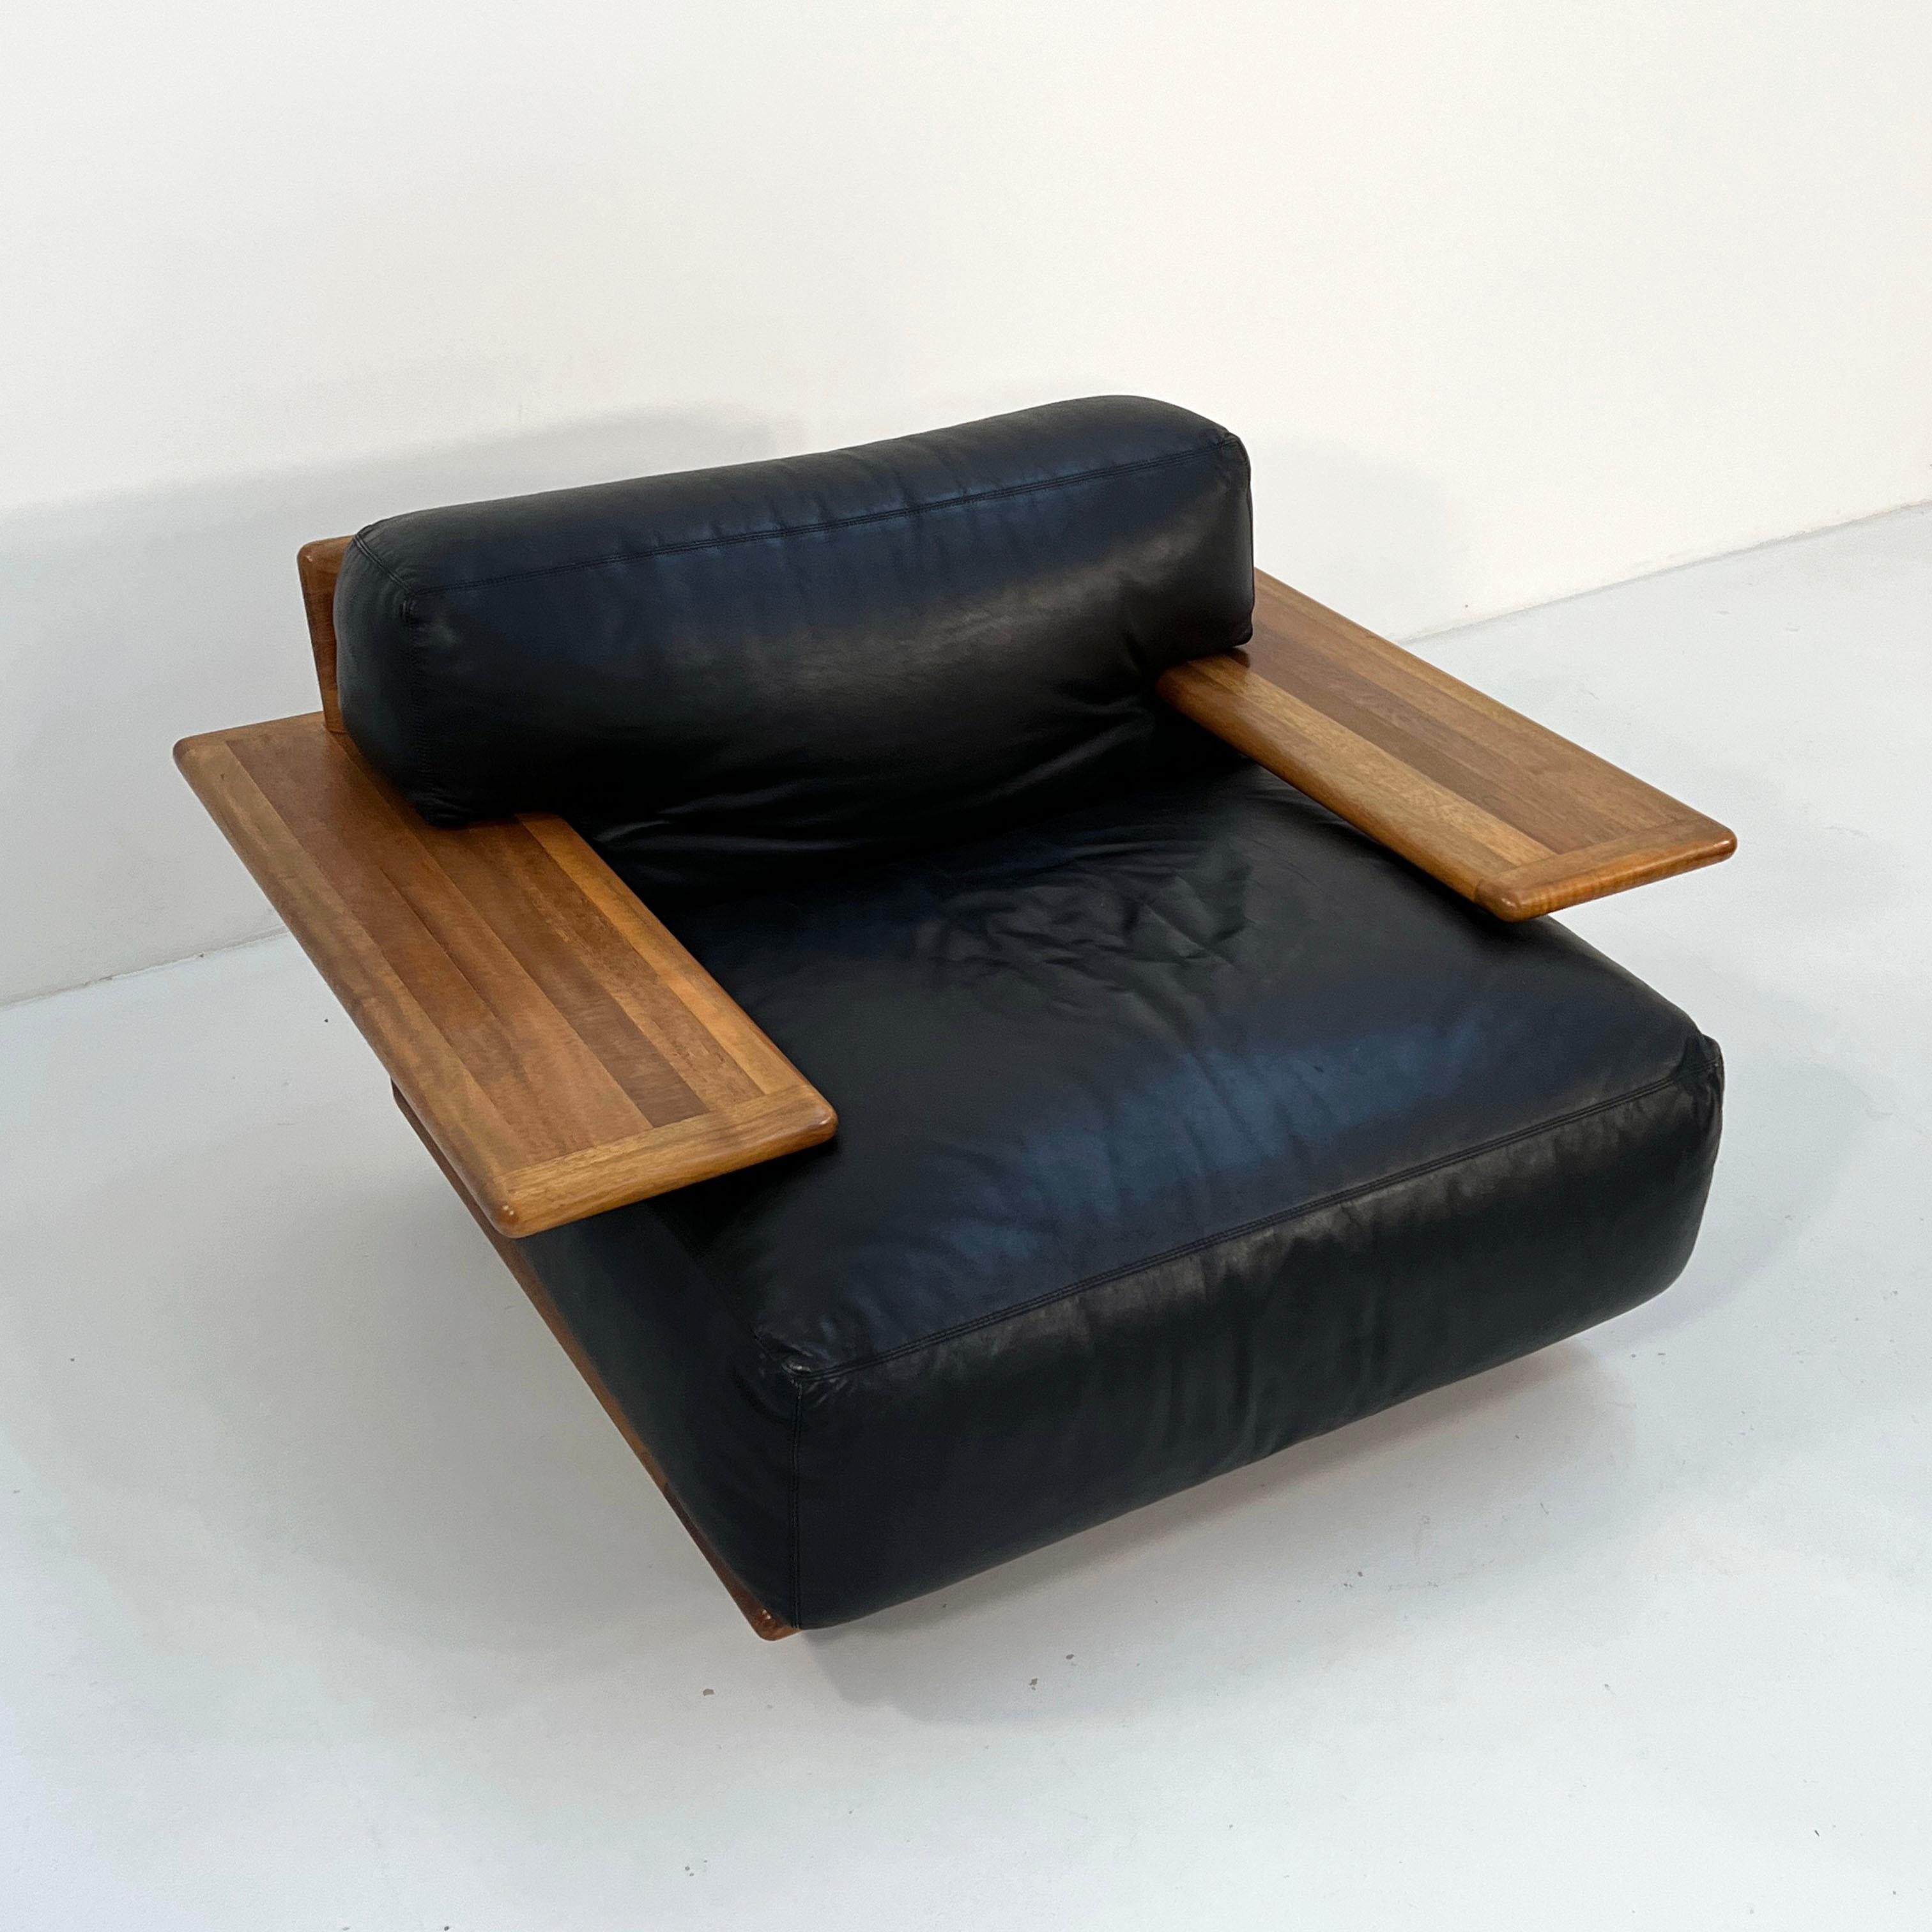 Pianura Armchair in Black Leather by Mario Bellini for Cassina, 1970s For Sale 3